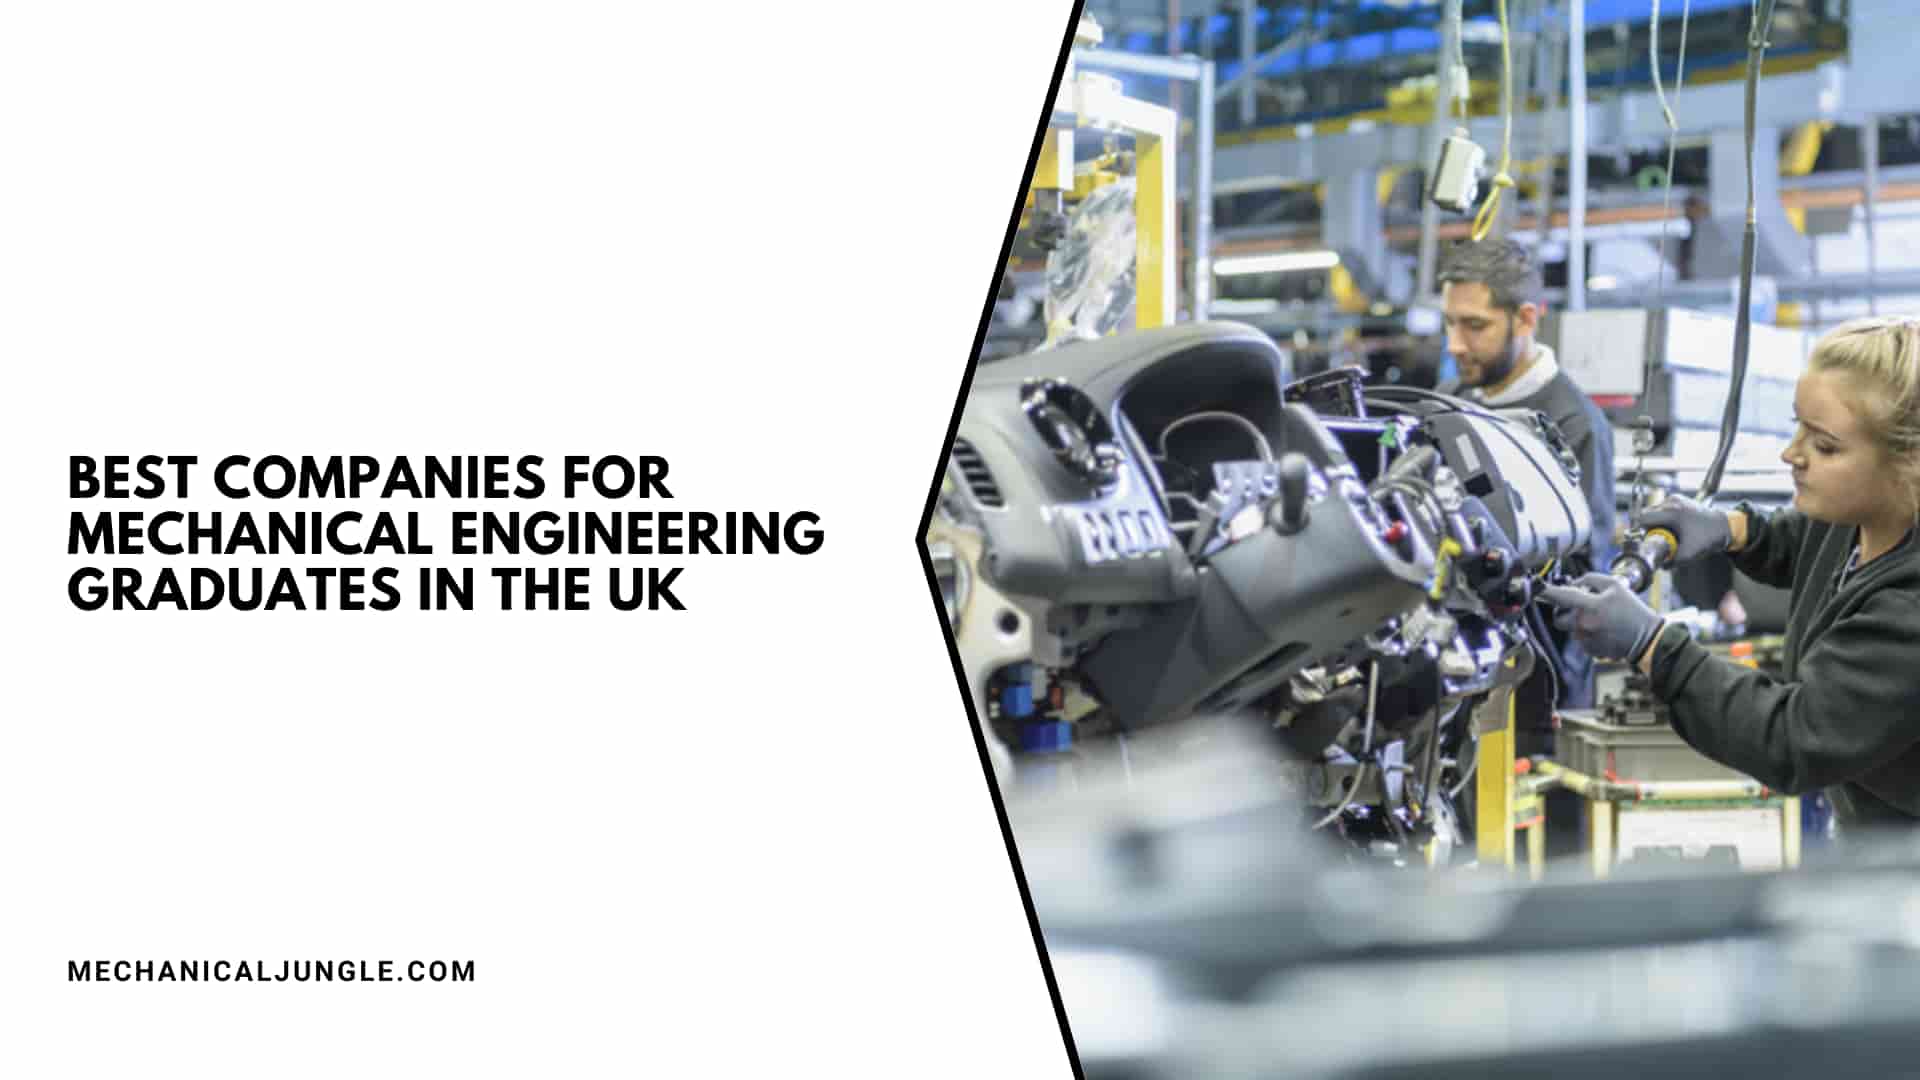 Best Companies for Mechanical Engineering Graduates in the UK